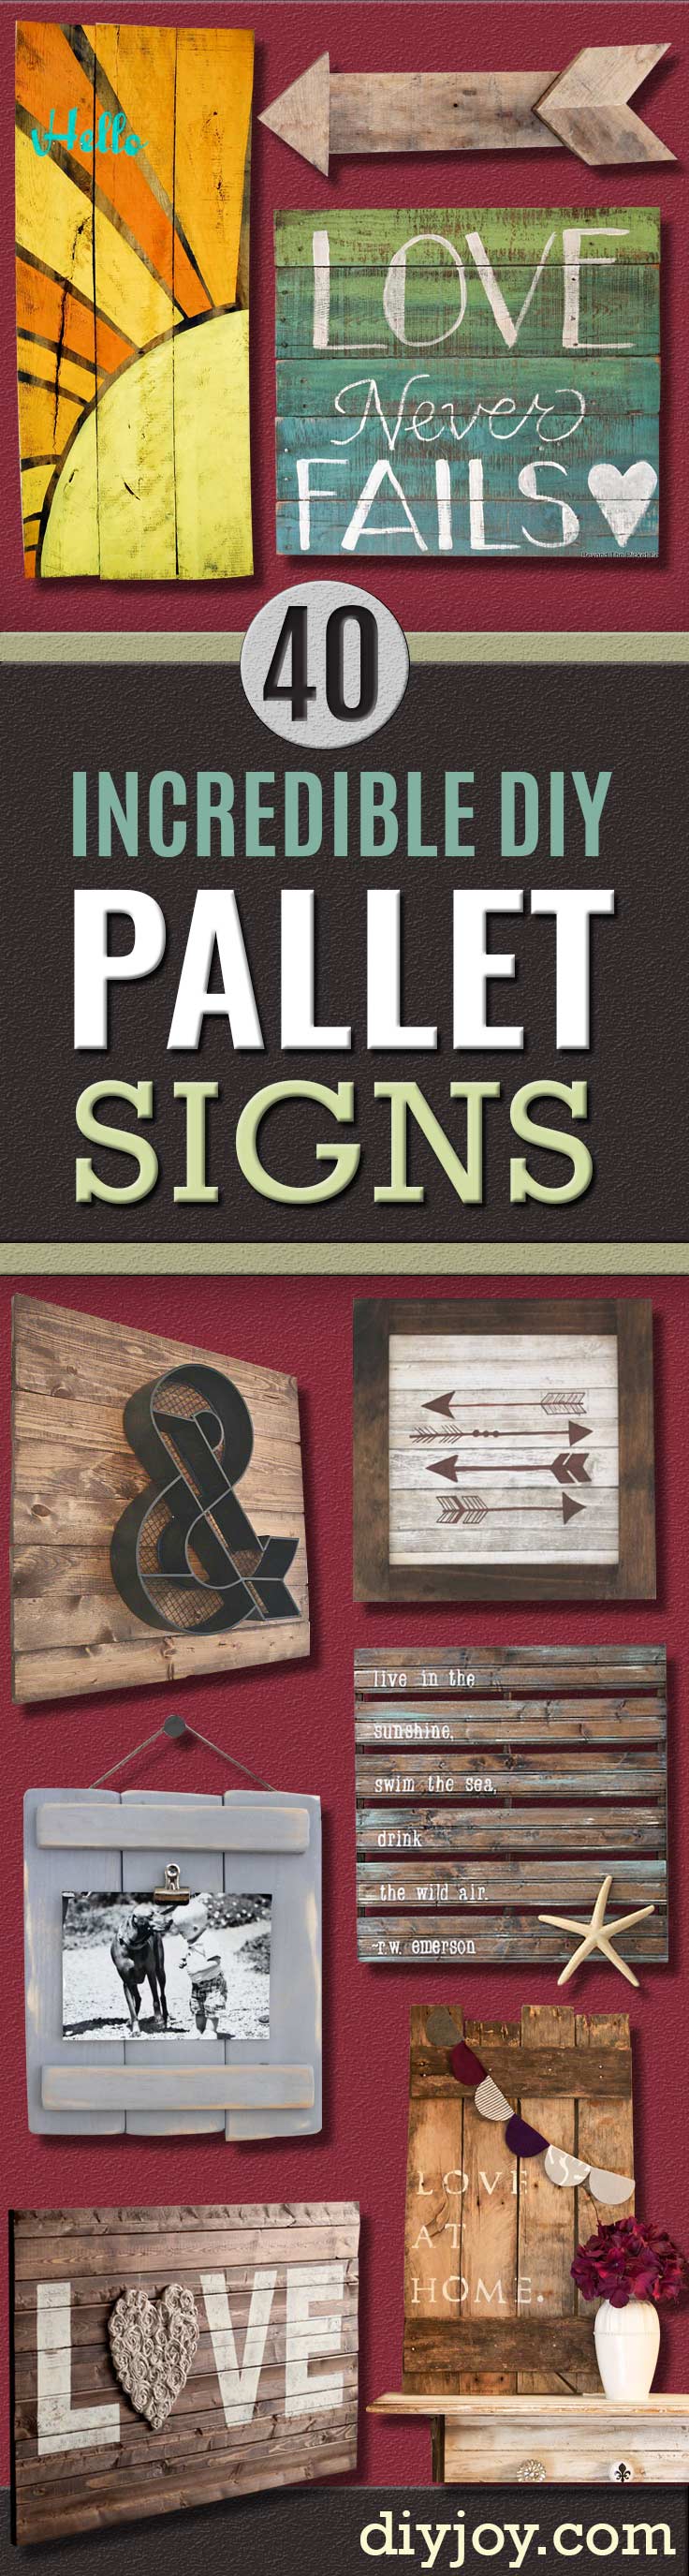 DIY Pallet sign Ideas - Cool Homemade Wall Art Ideas and Pallet Signs for Bedroom, Living Room, Patio and Porch. Creative Rustic Decor Ideas on A Budget